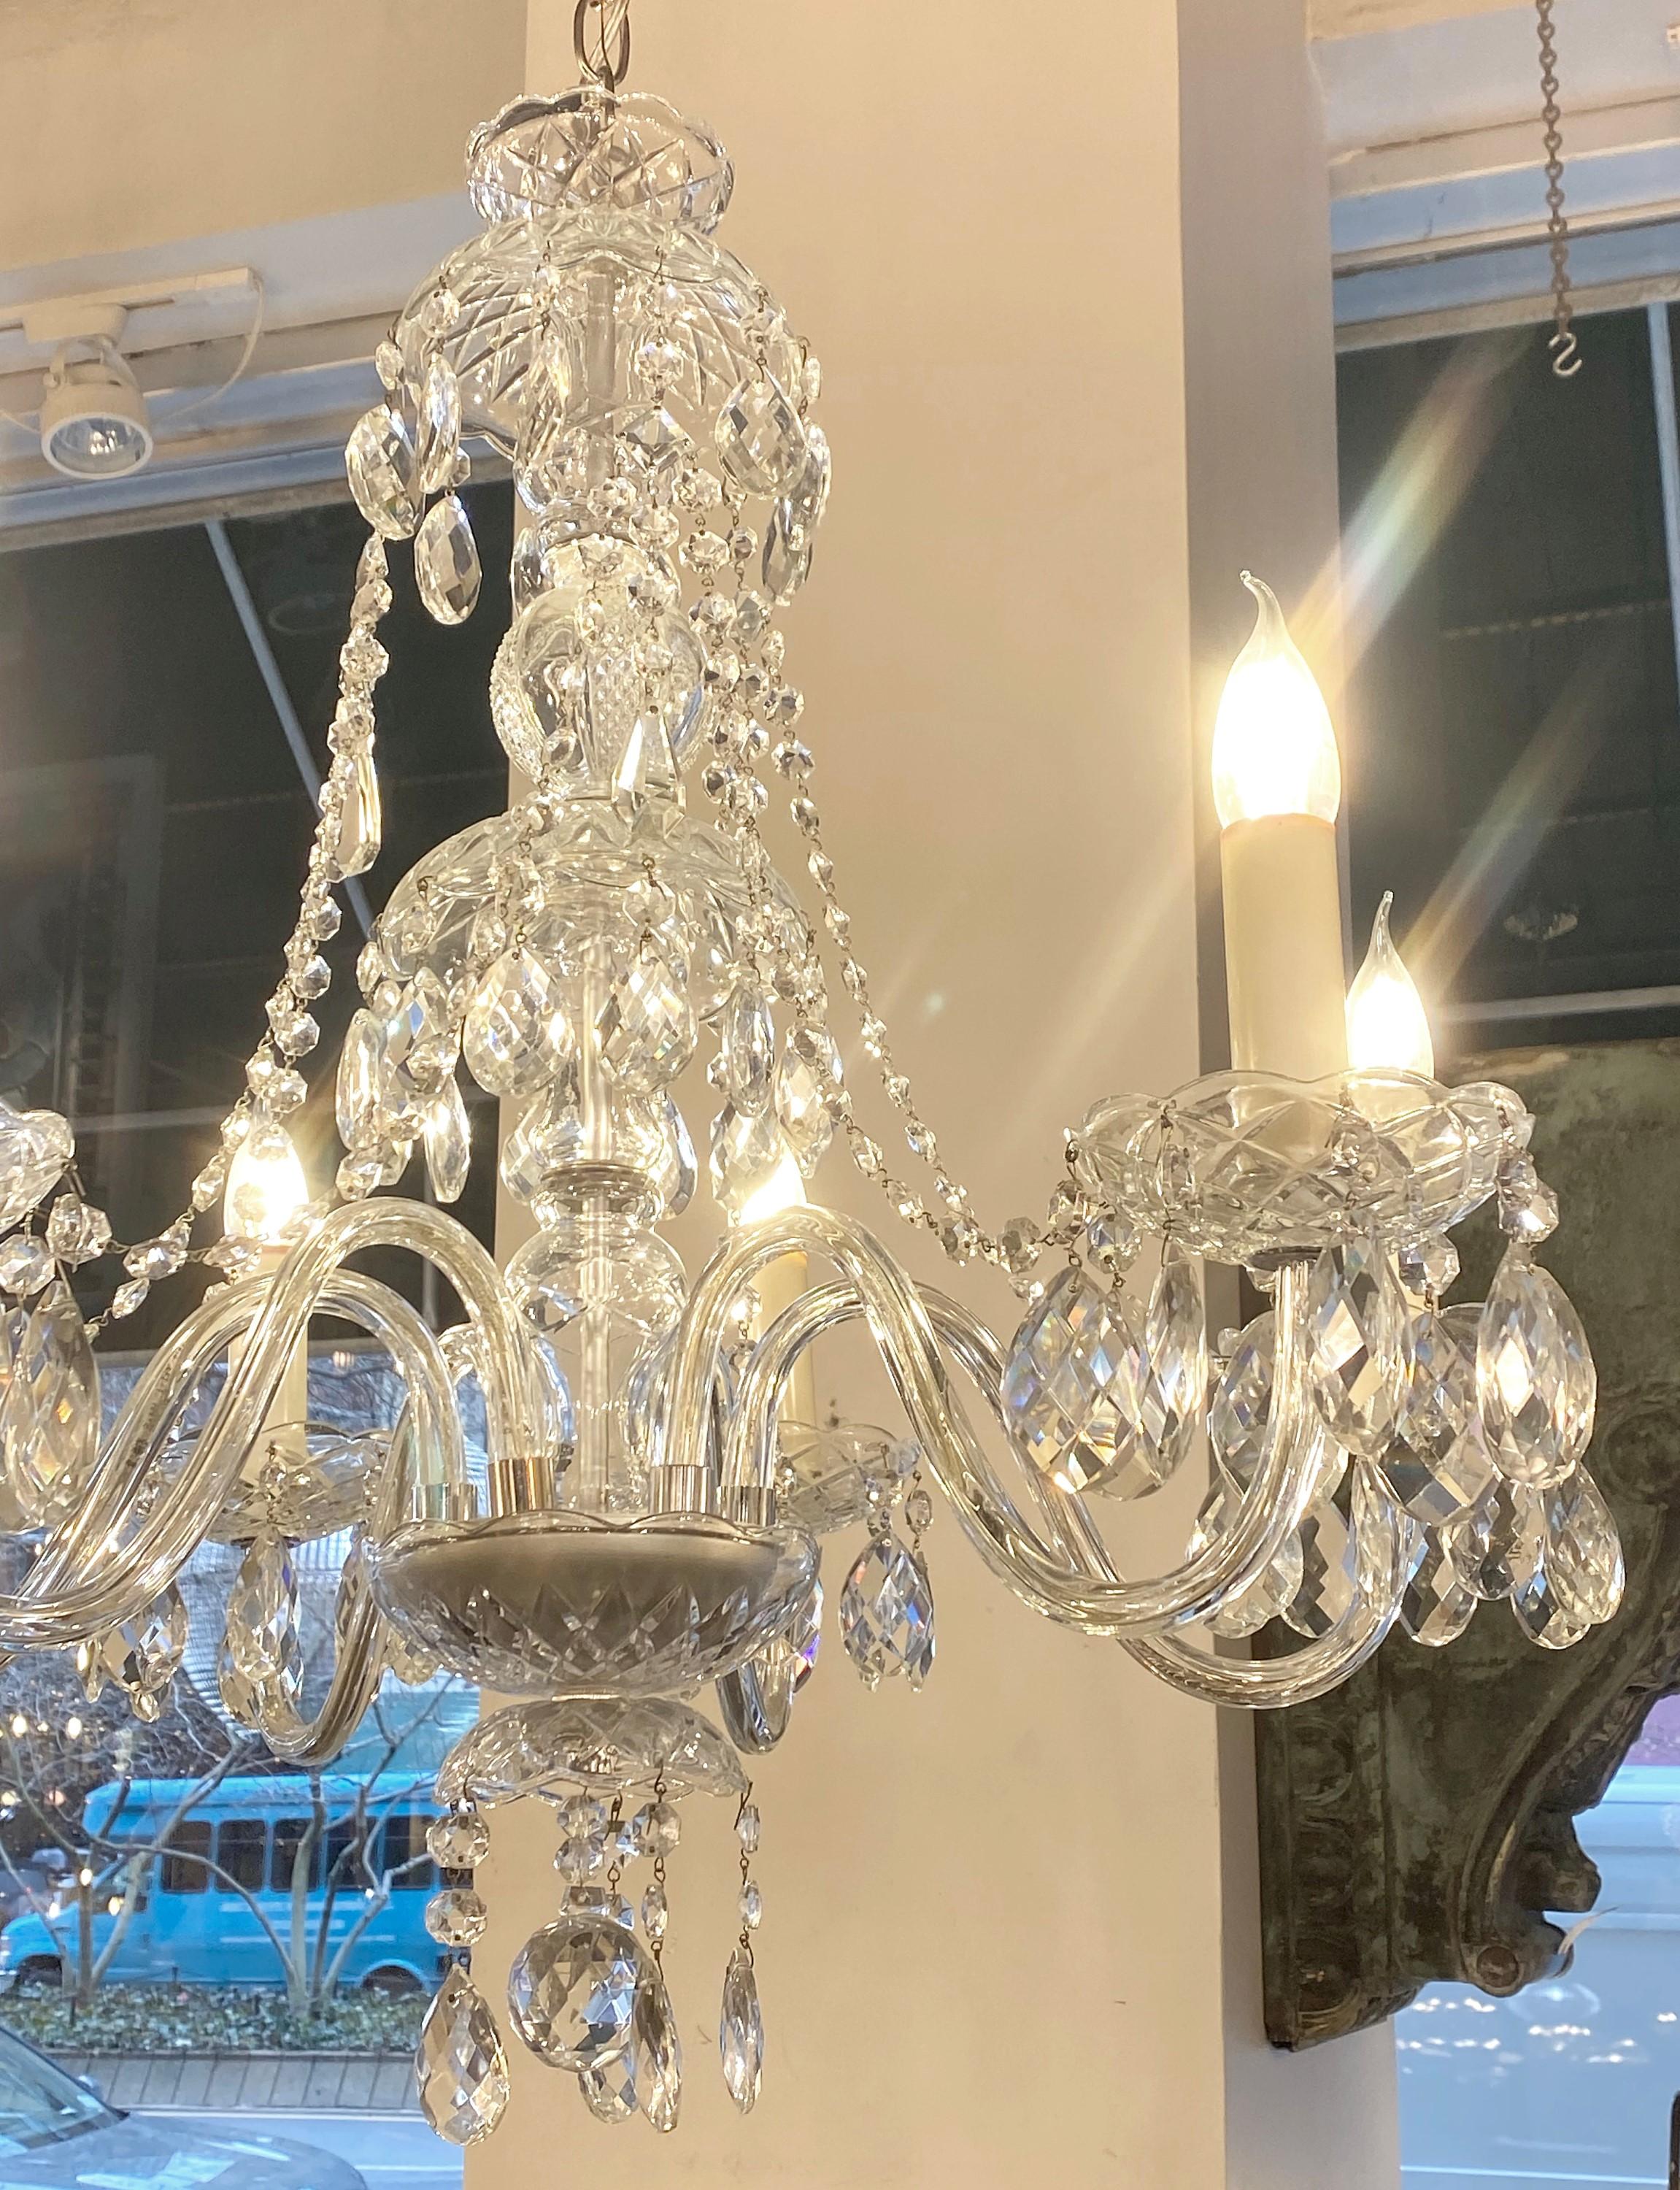 1940s antique crystal chandelier featuring swags of crystals between the arms and almond shaped crystals dripping from the bobeches. Takes six standard candelabra lightbulbs. Cleaned and restored. Please note, this item is located in one of our NYC